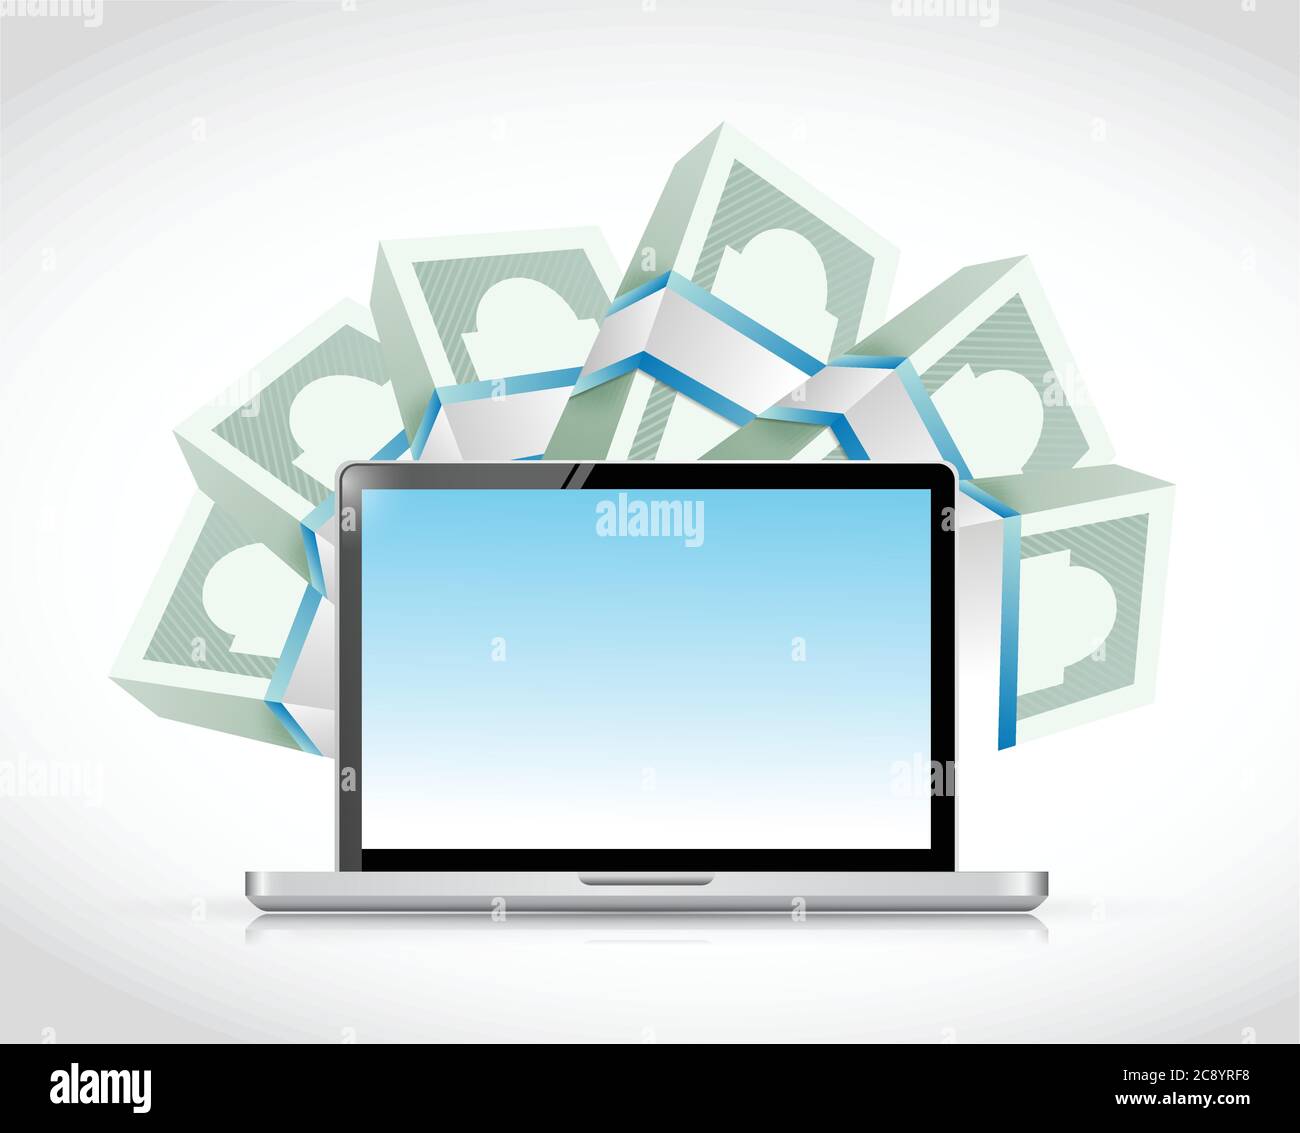 Laptop computer and money around. illustration design over a white background Stock Vector